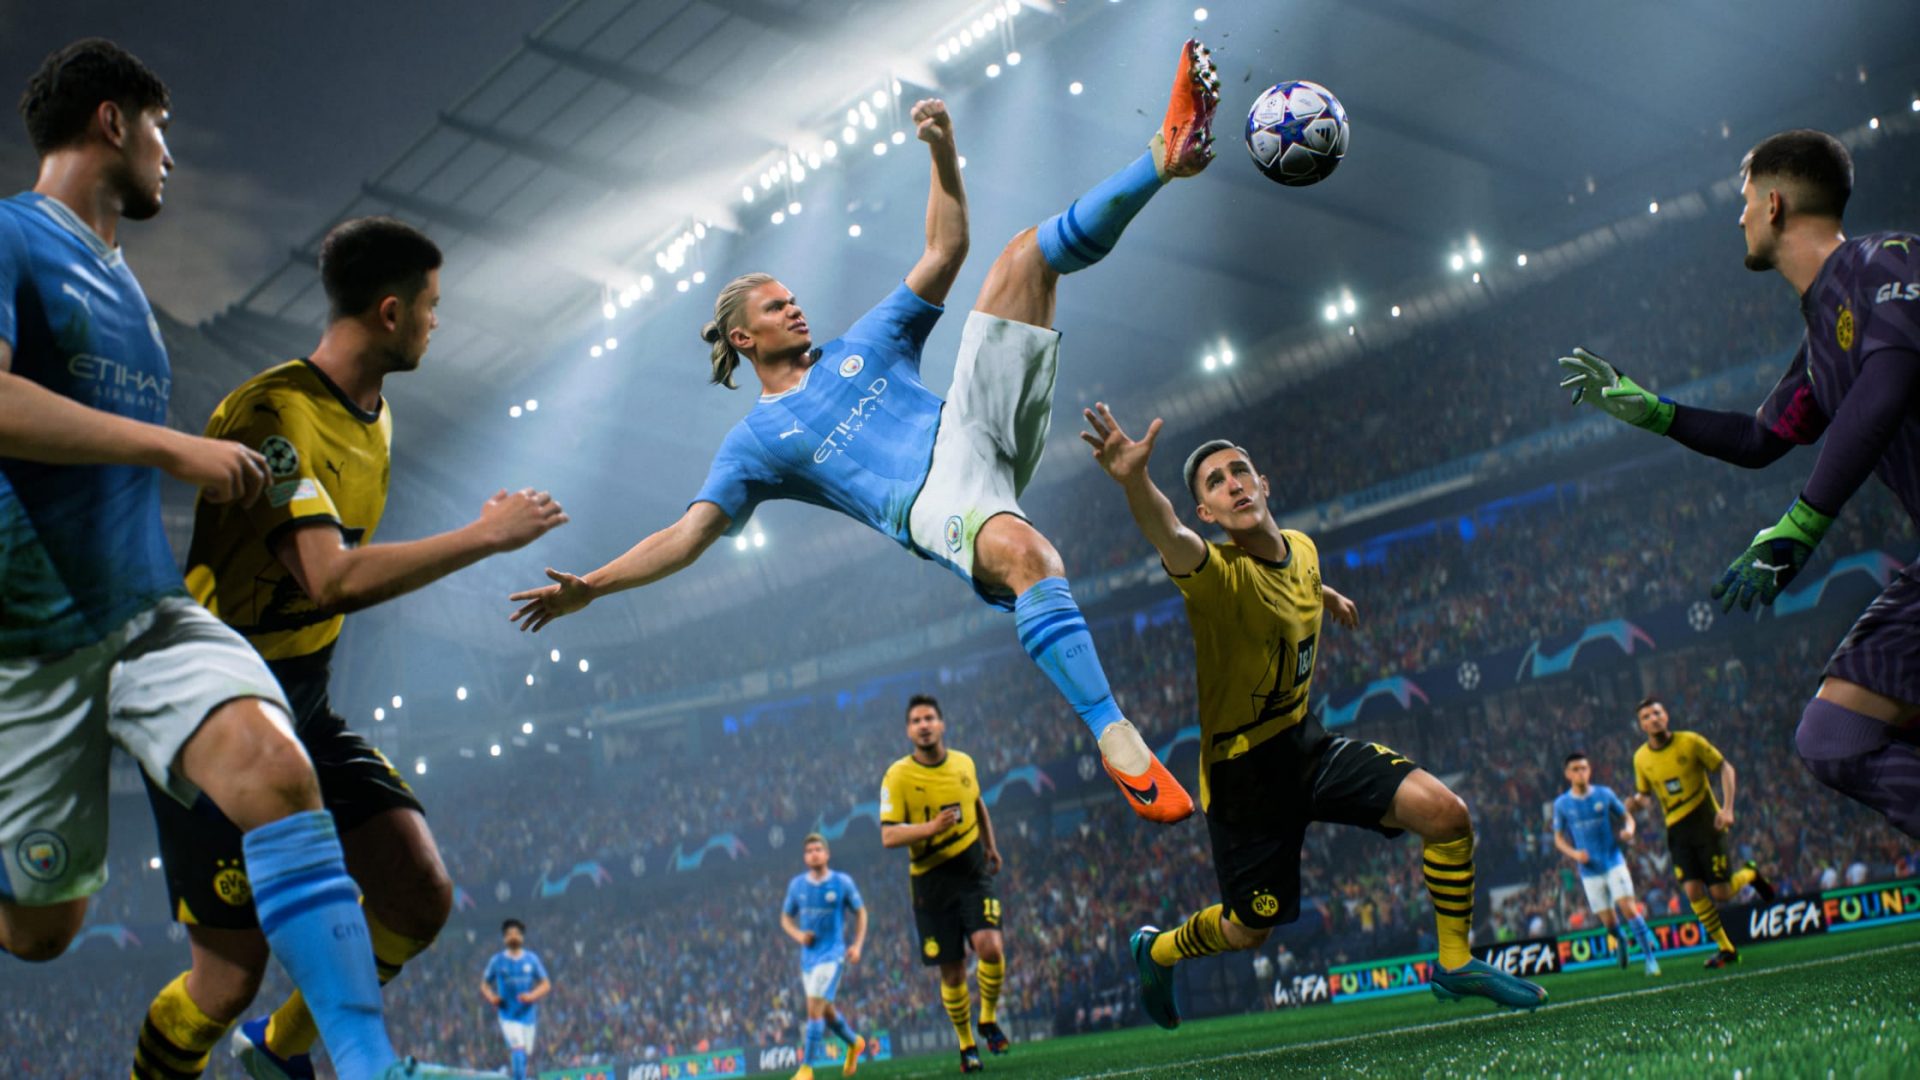 EA Sports FC 24 Will Reportedly Release on September 29: Editions